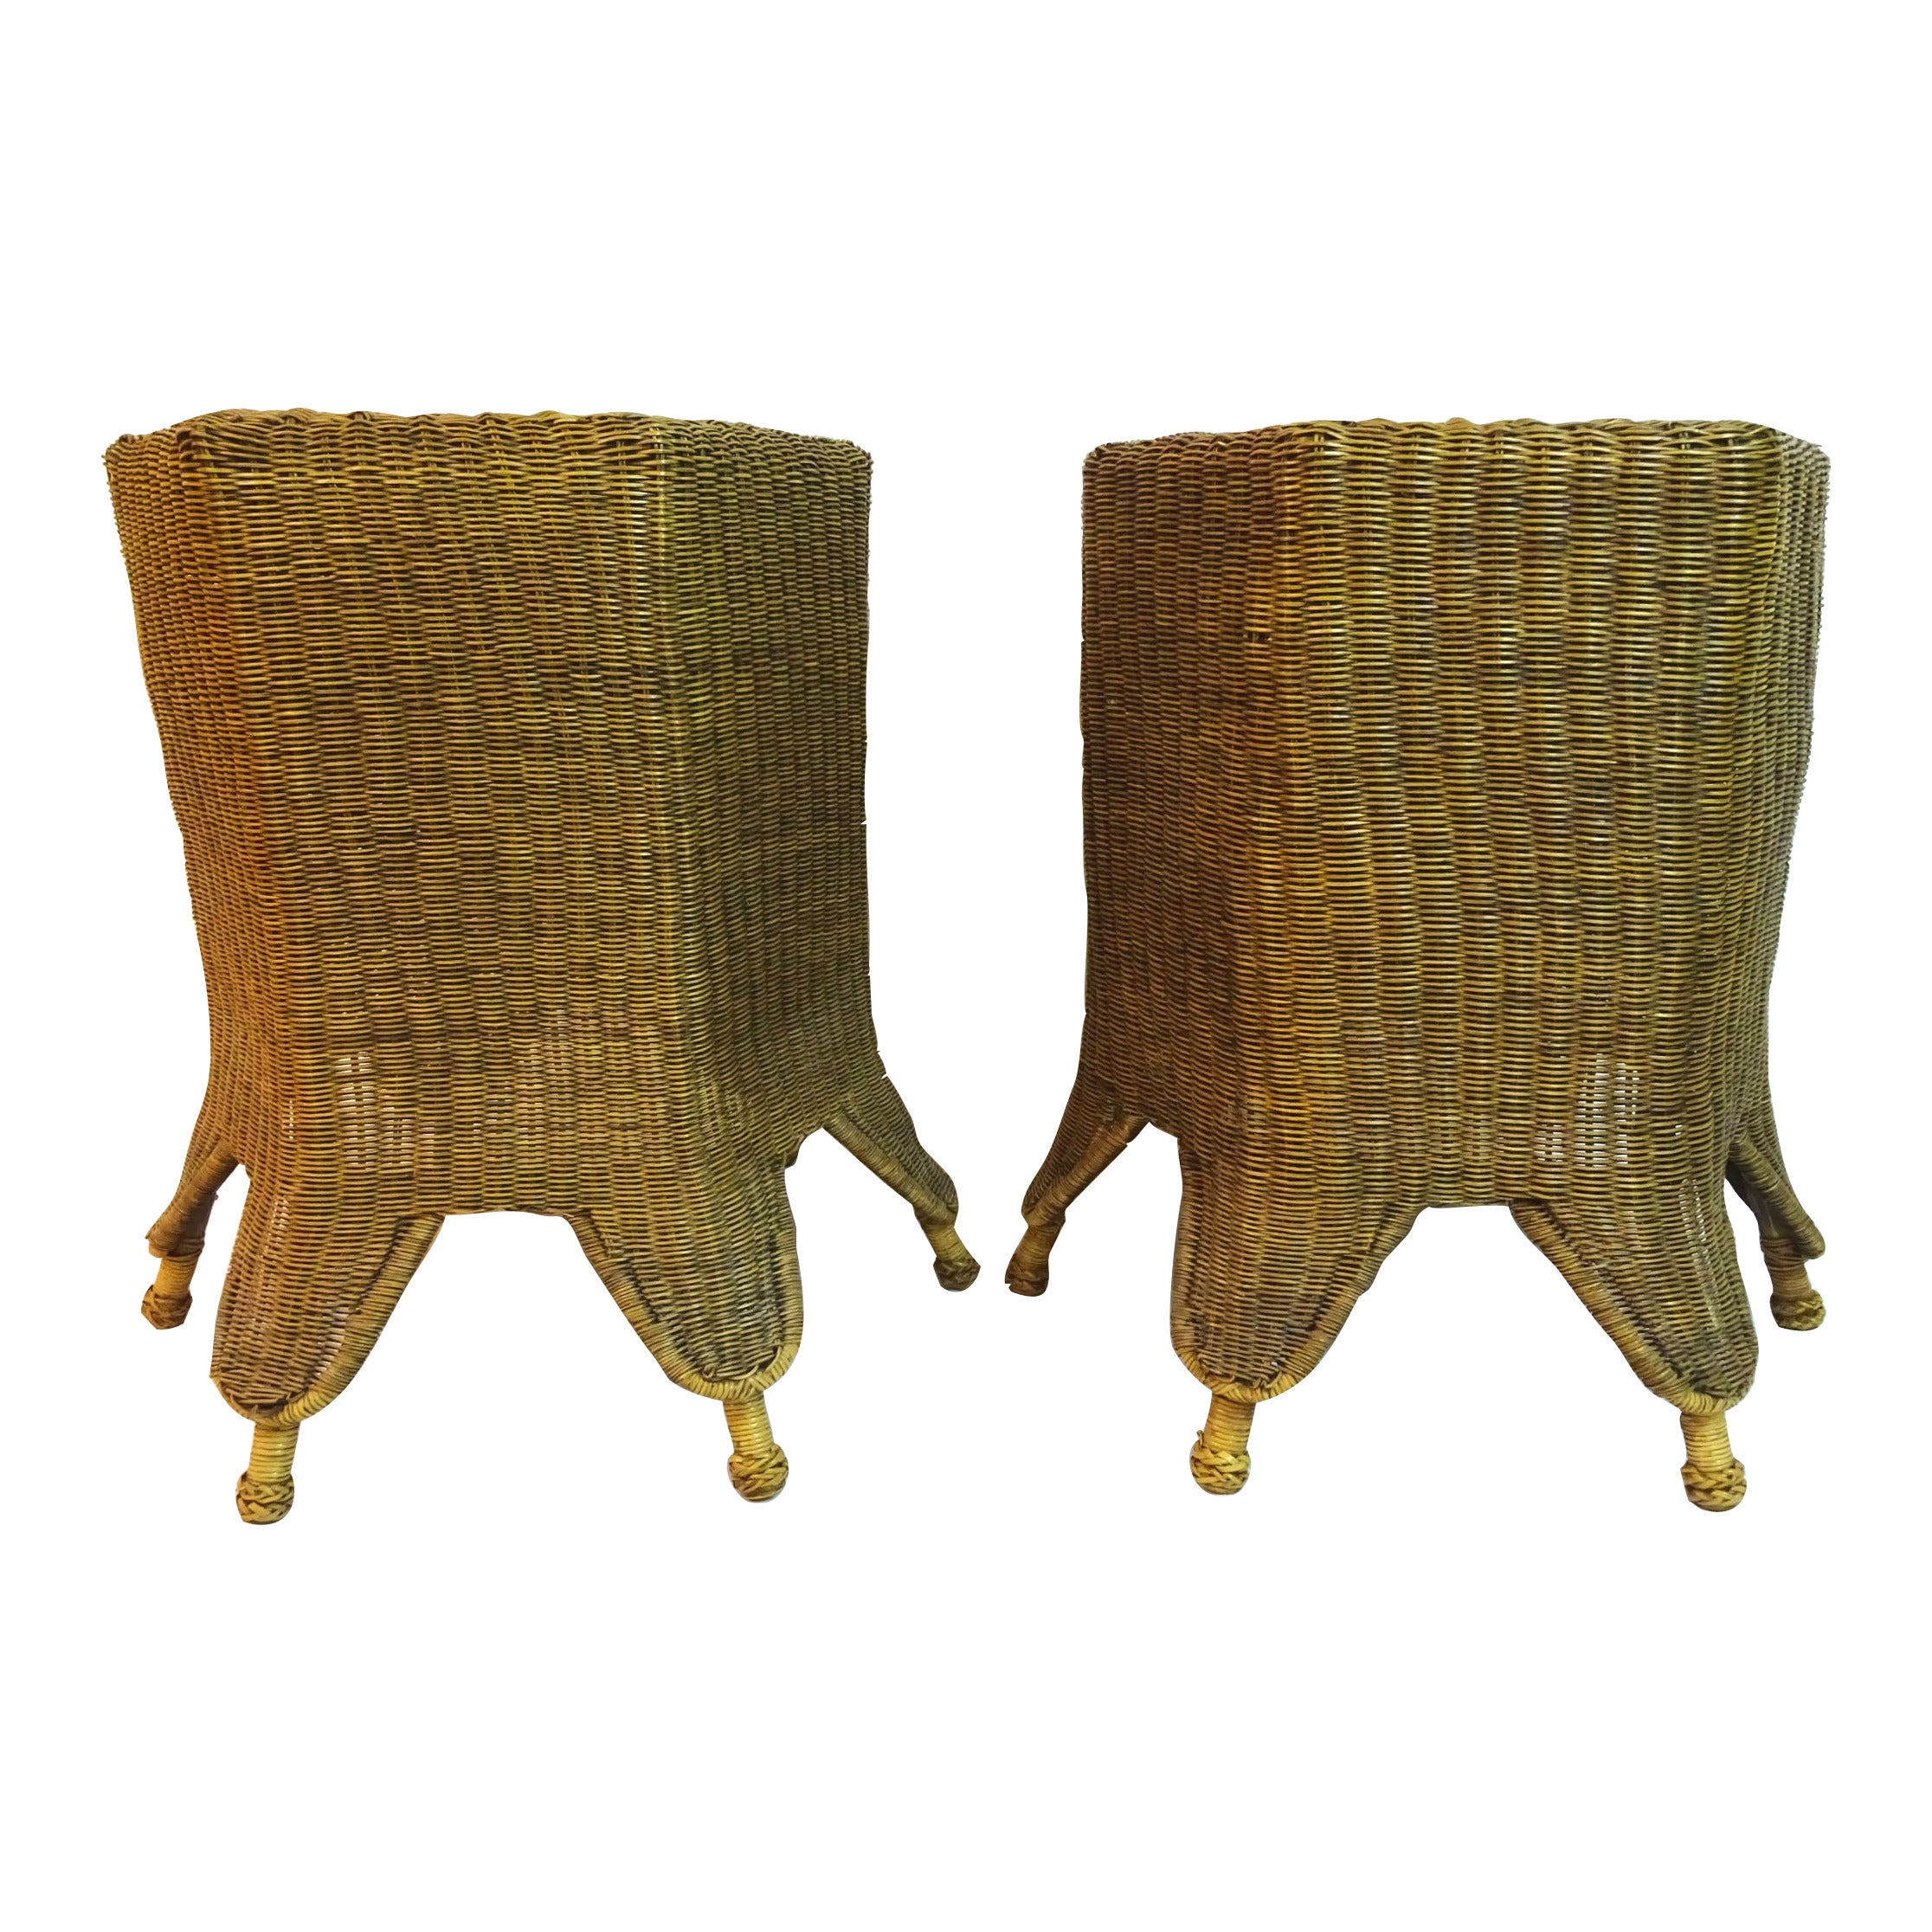 Pair of 20th Century Handwoven Wicker Hexagonal Side Tables For Sale